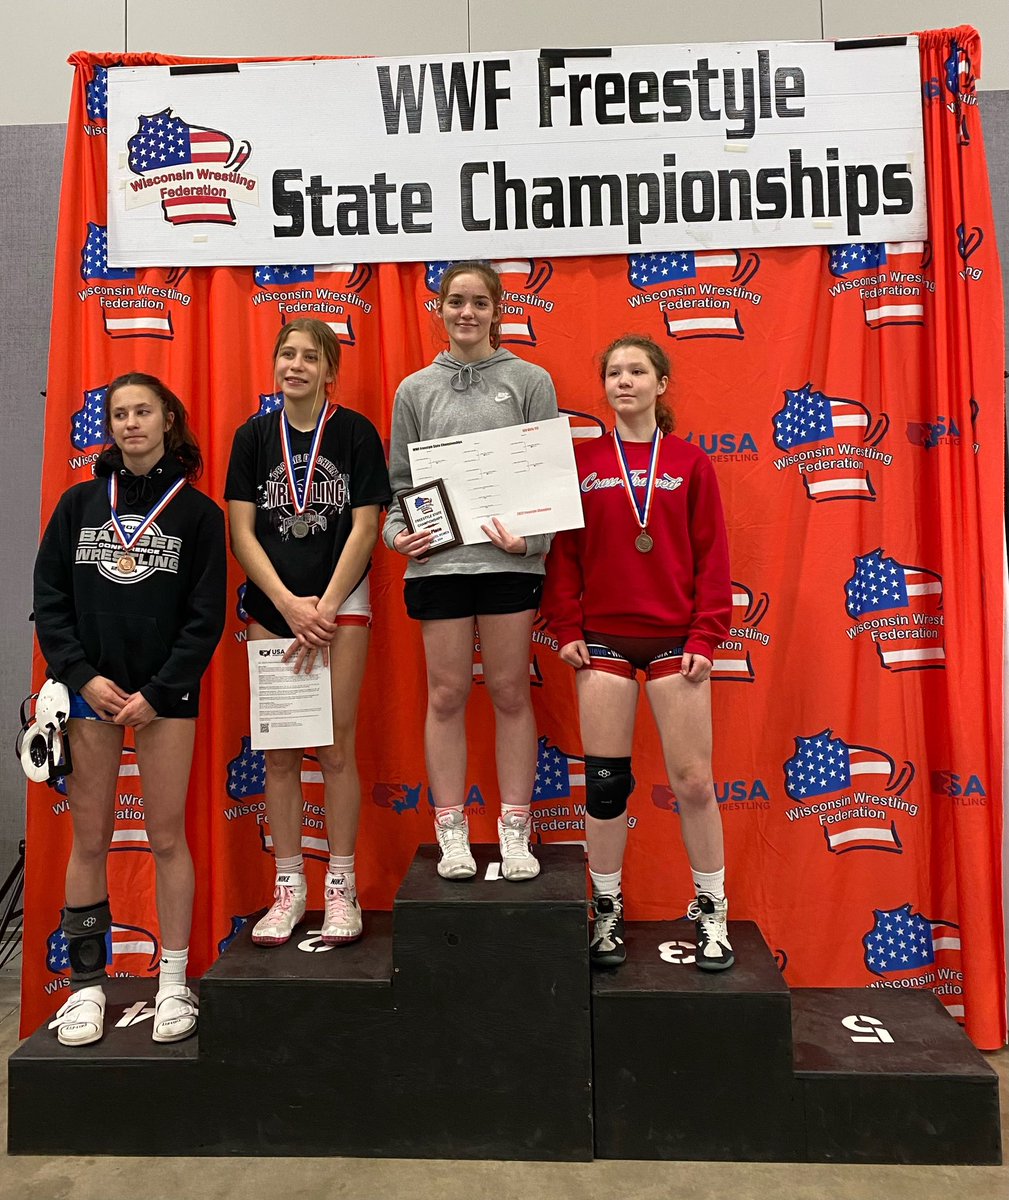 Congrats to Zoe Licht for winning a Freestyle State Title yesterday! 🥇 Zoe dominated her bracket on the way to being crowned the champion! #GrowGirlsWrestling #BleedPink